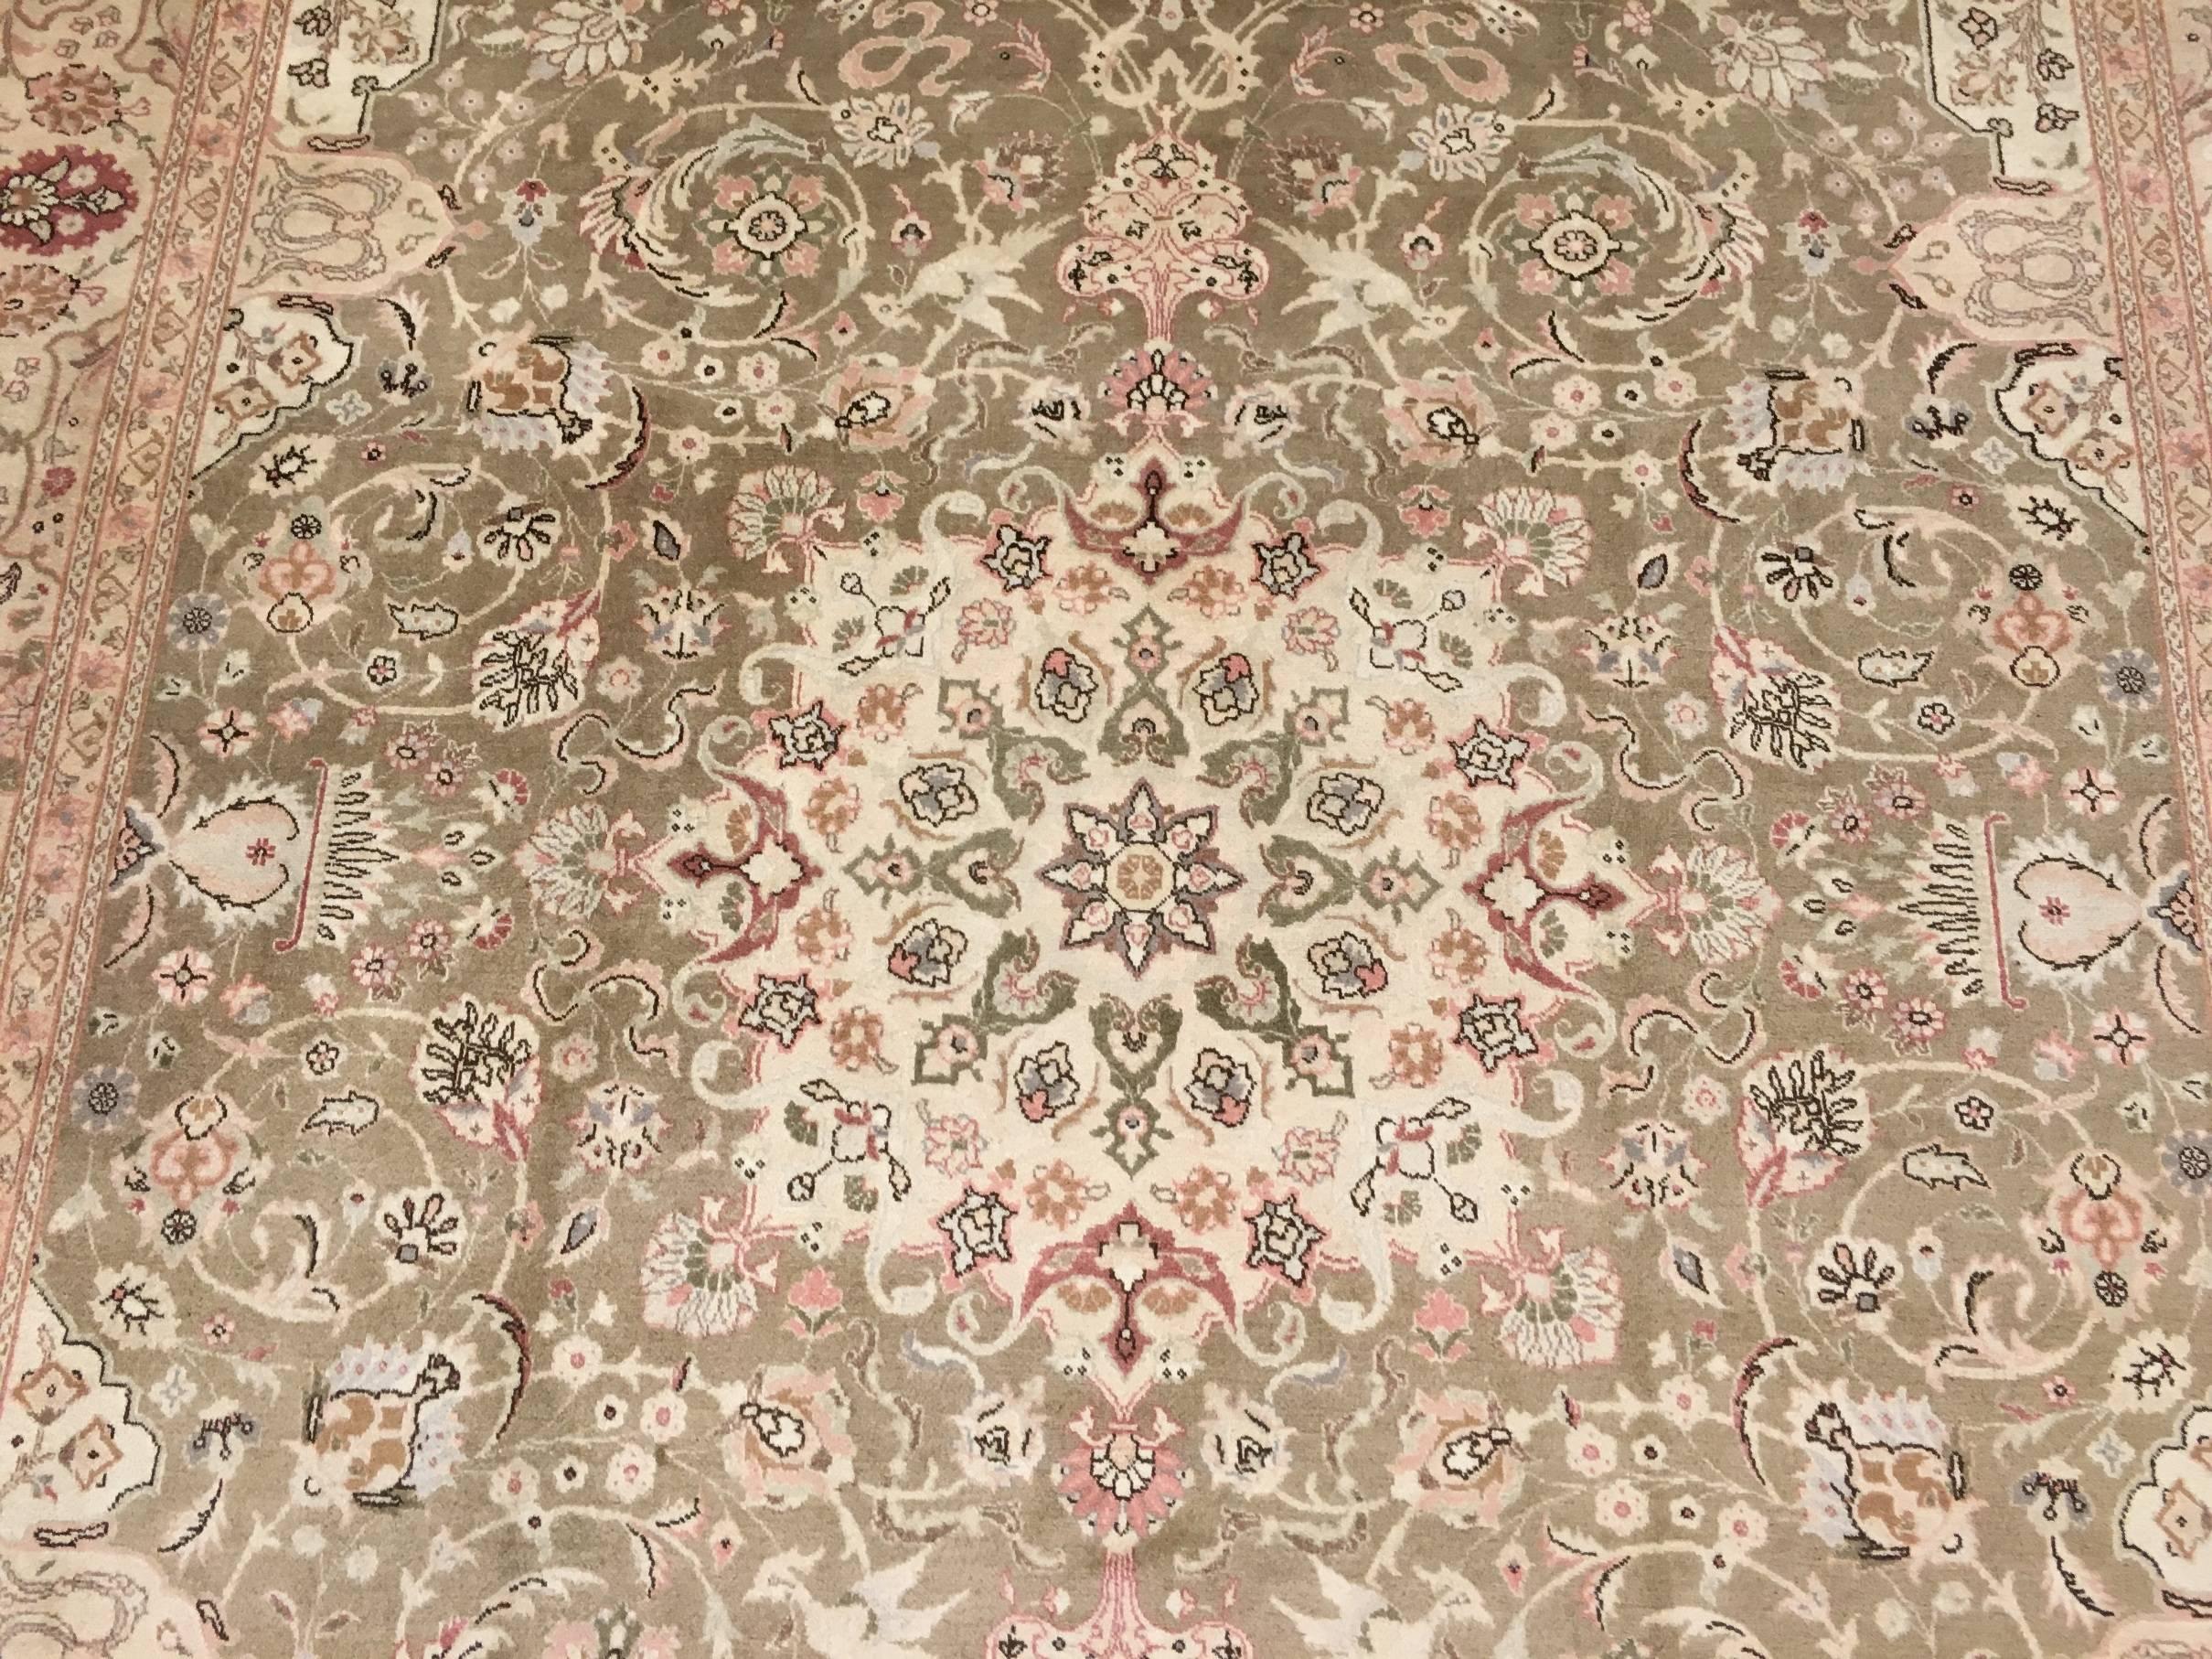 This is a Persian Tabriz handwoven circa 1930-1940 by master weavers in Iran in the city of Tabriz. The weaver has put attention to colors and detail thus making this a very tight weave. This rug is what is better know as a 50 Raj weave. The